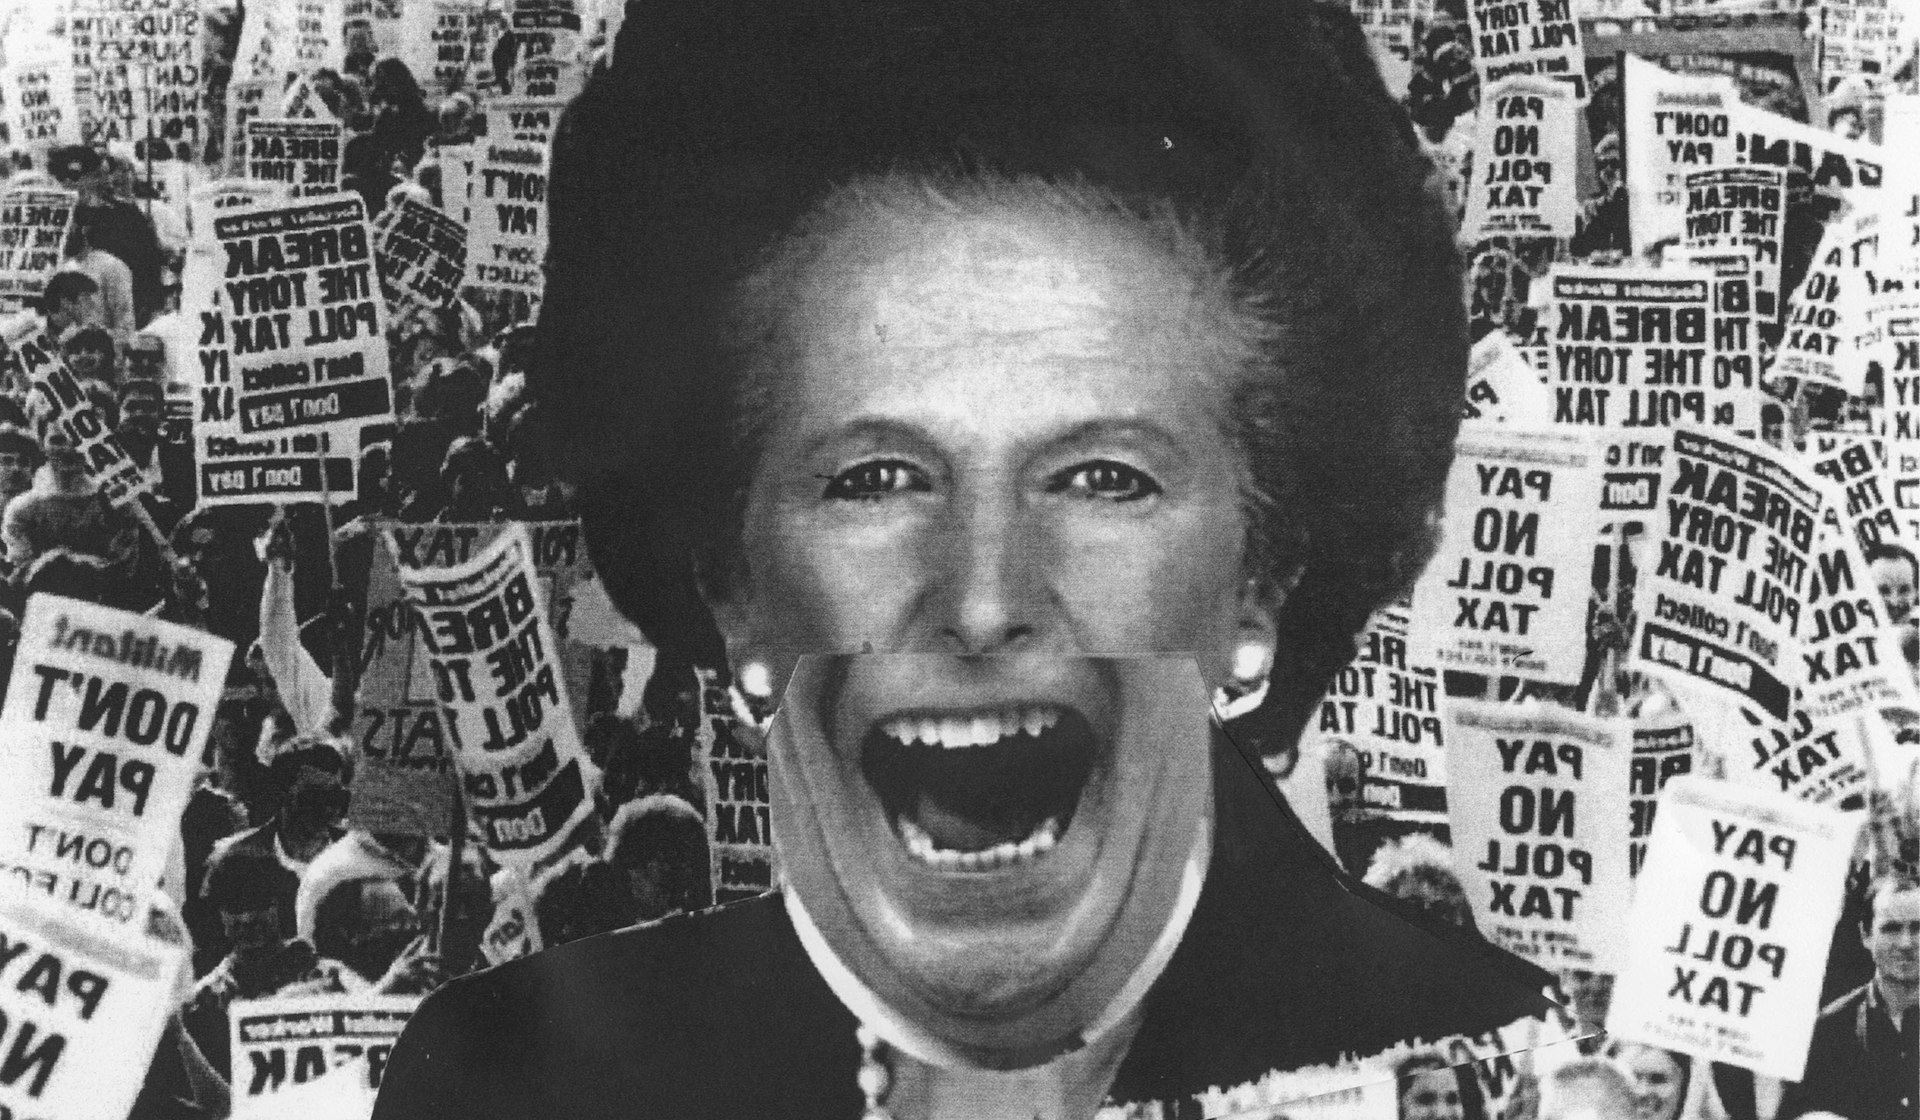 The Great British Breakup: the Thatcher years